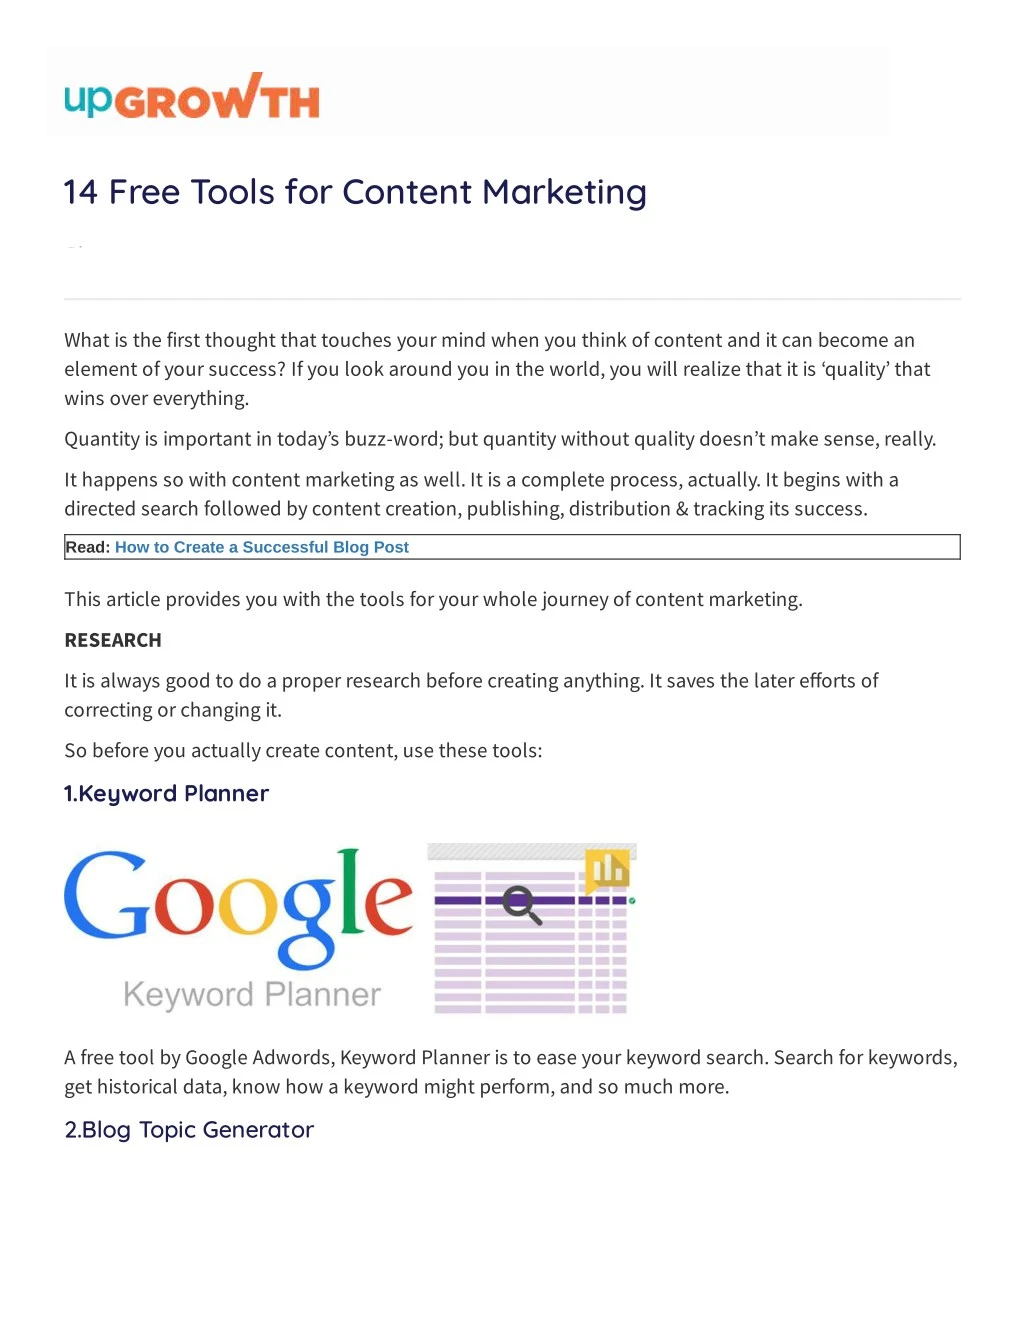 14 free tools for content marketing